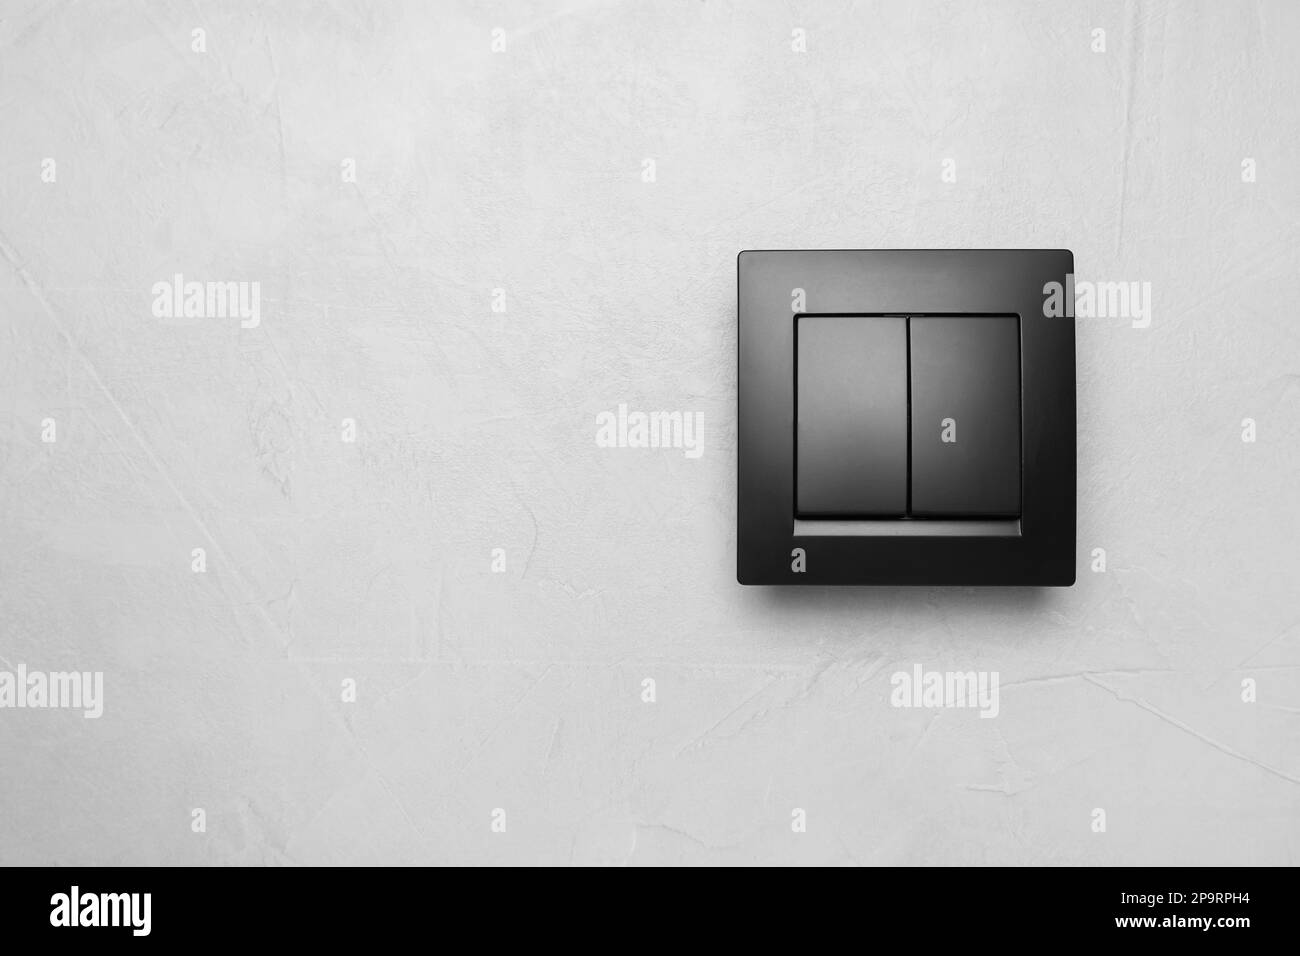 Black light switch on white background. Space for text Stock Photo